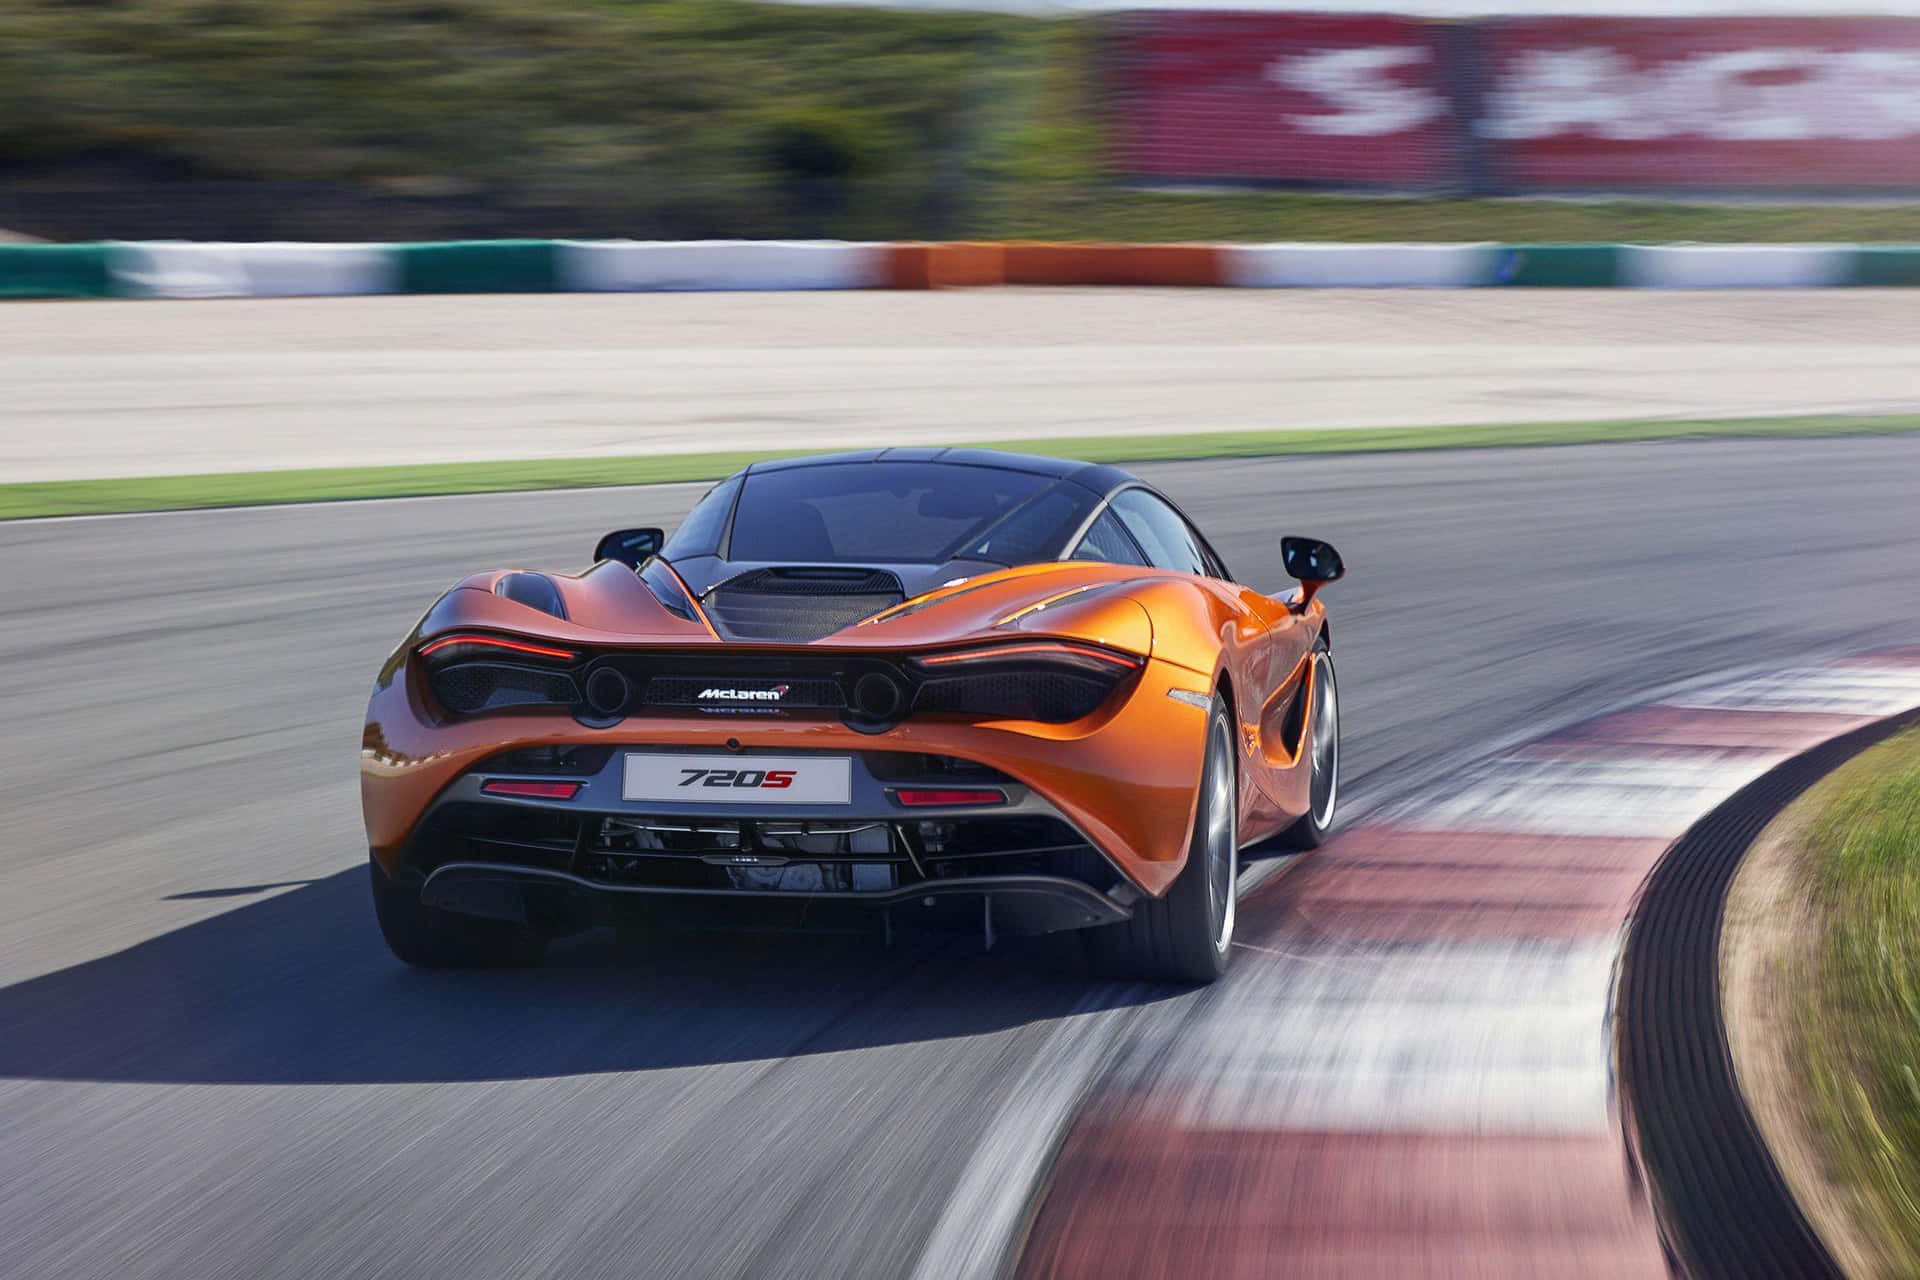 Mclaren 720s - A Vision Of Beauty&Performance